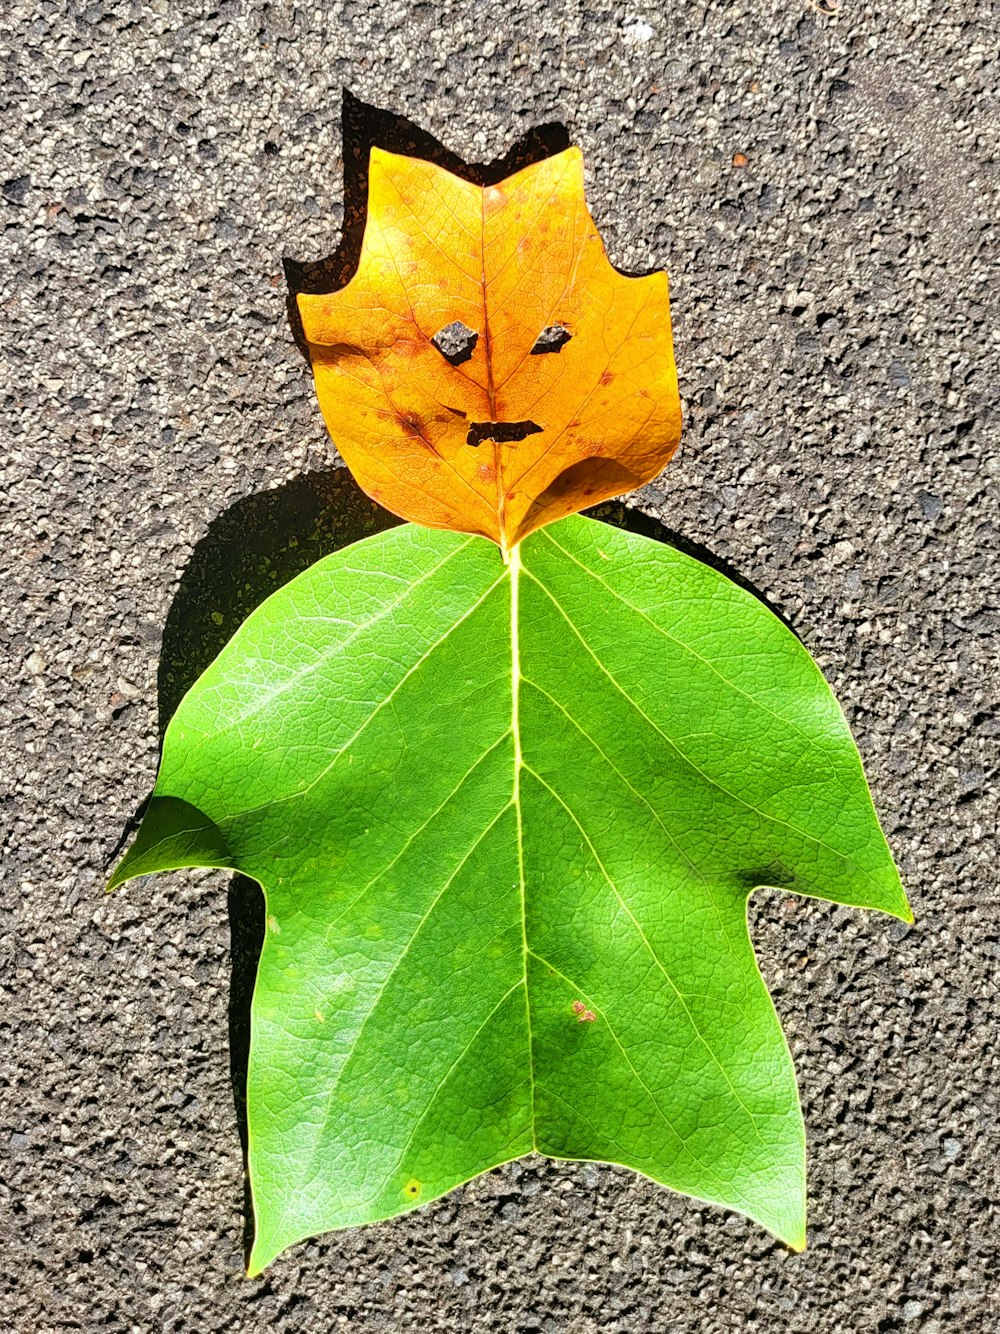 a leaf with a face drawn on it laying on the ground